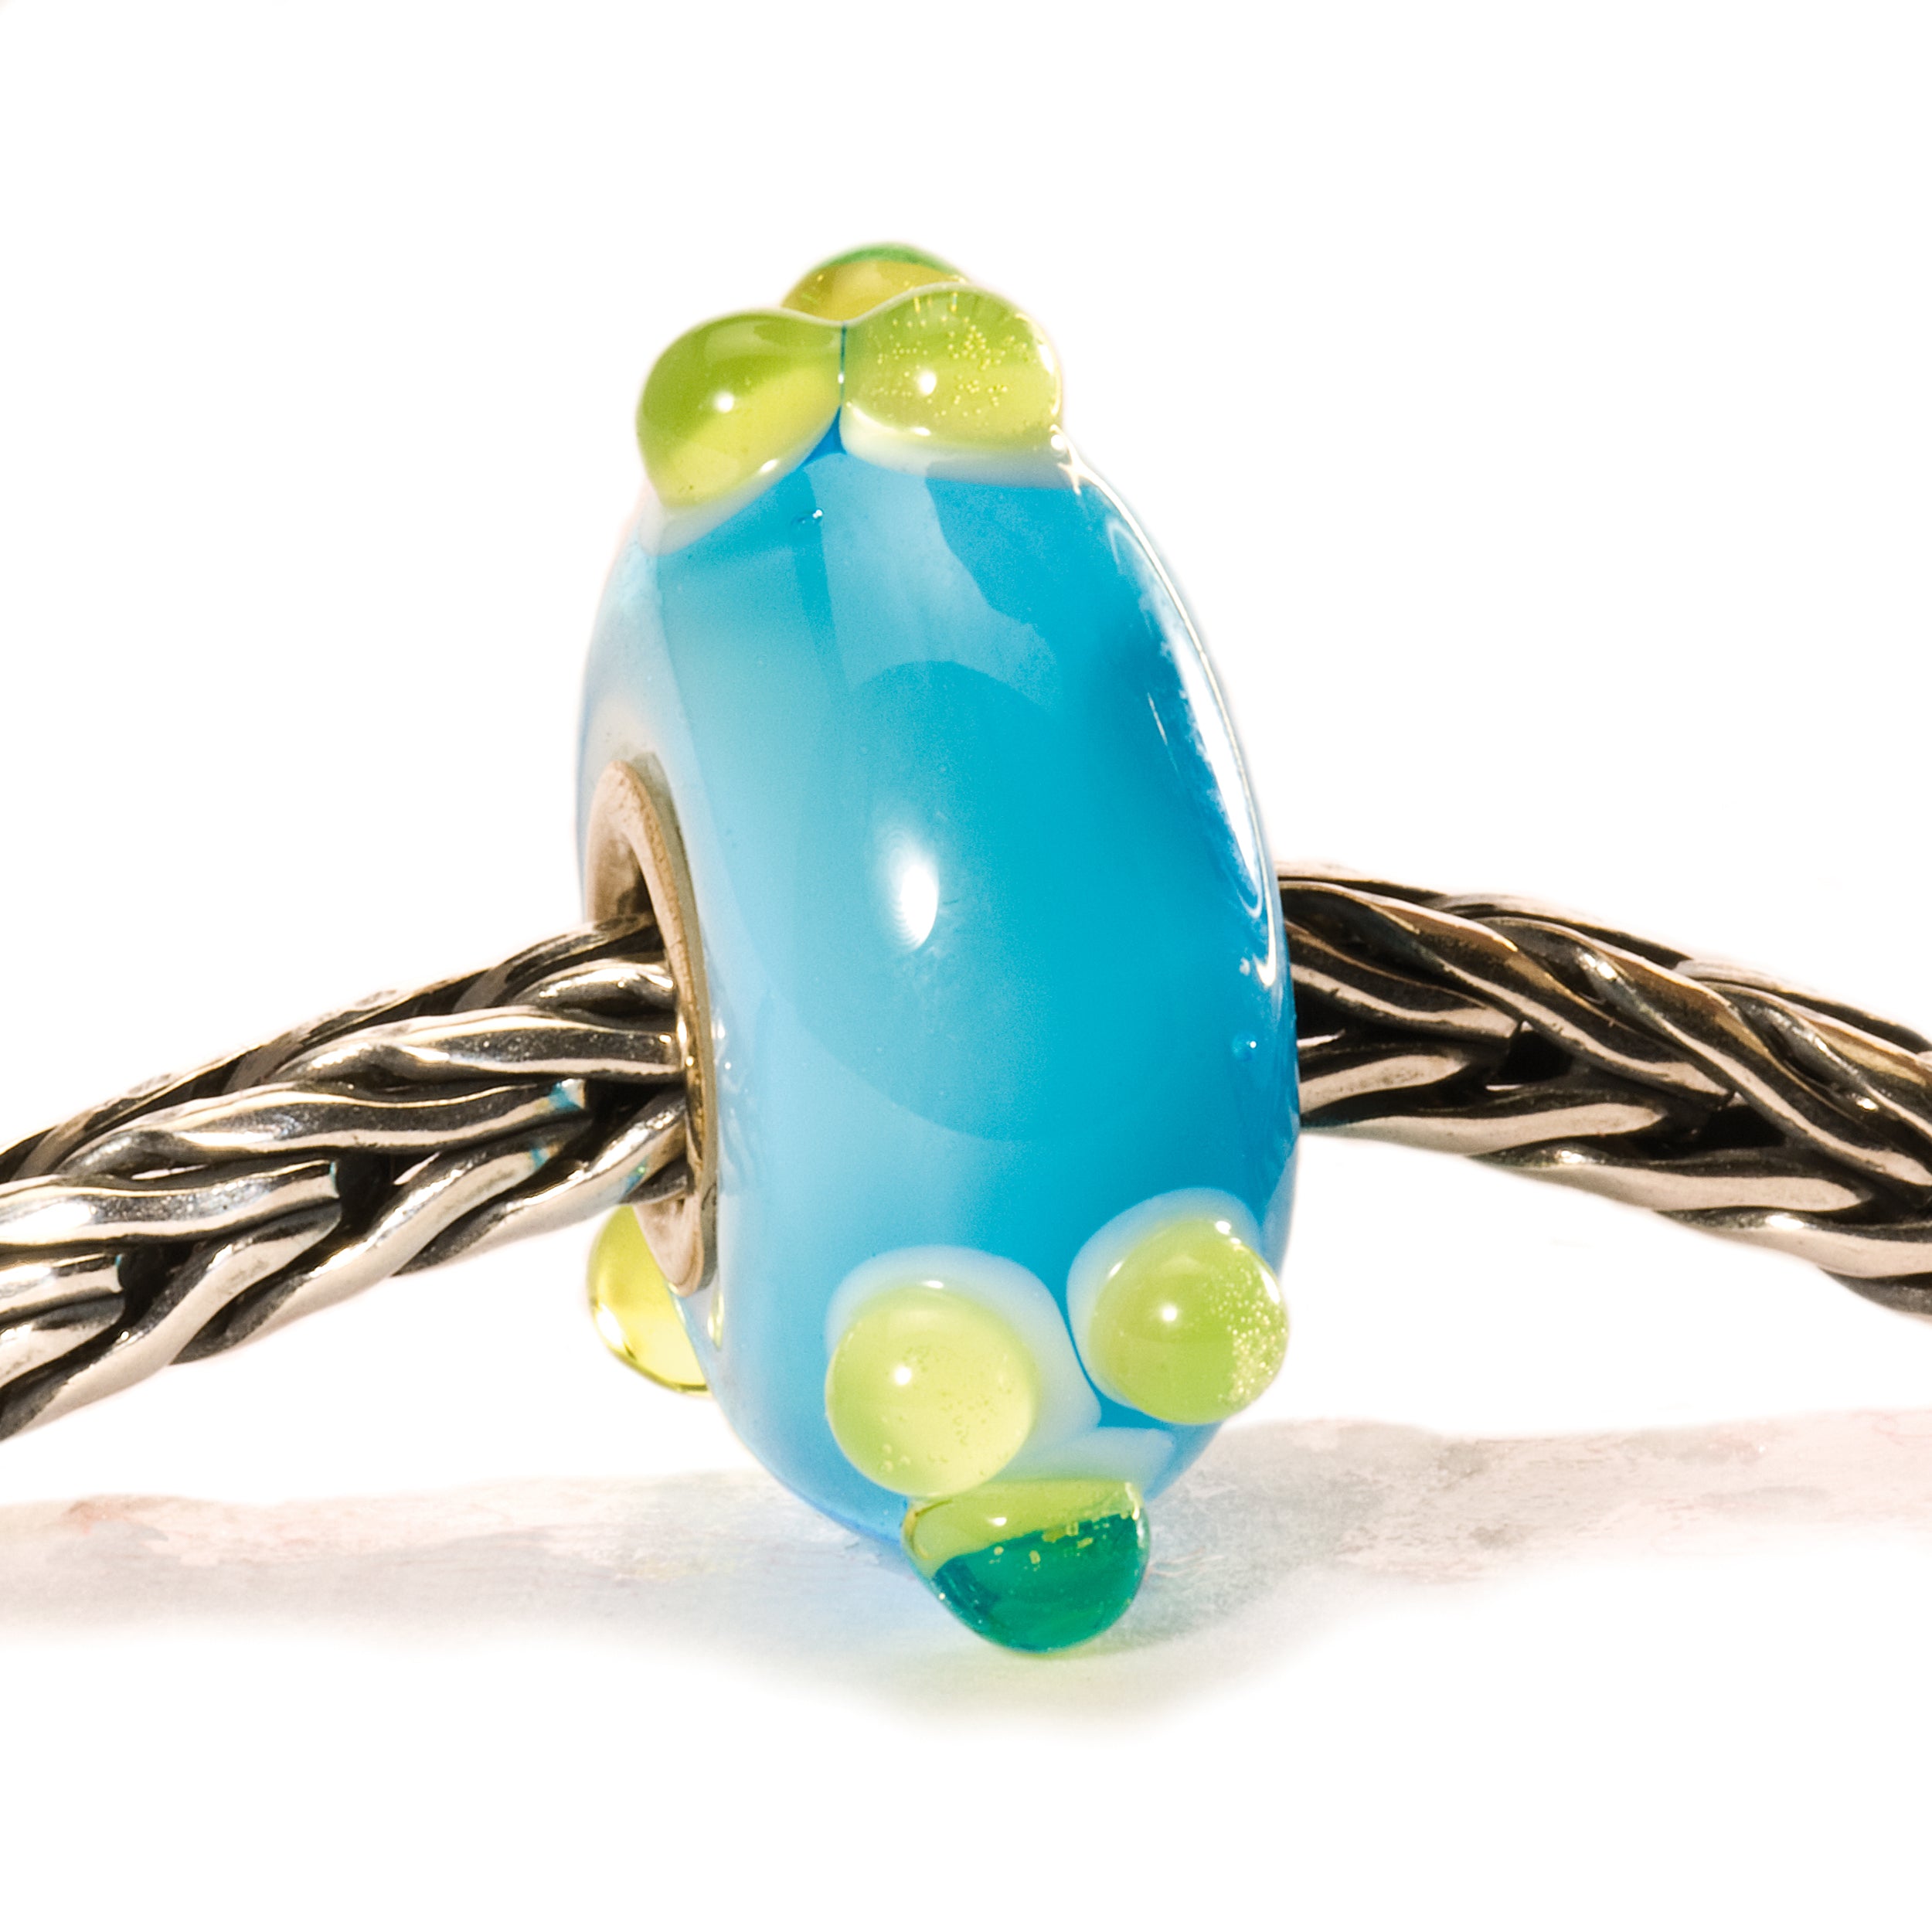 Turquoise/Green Spring Bud Bead